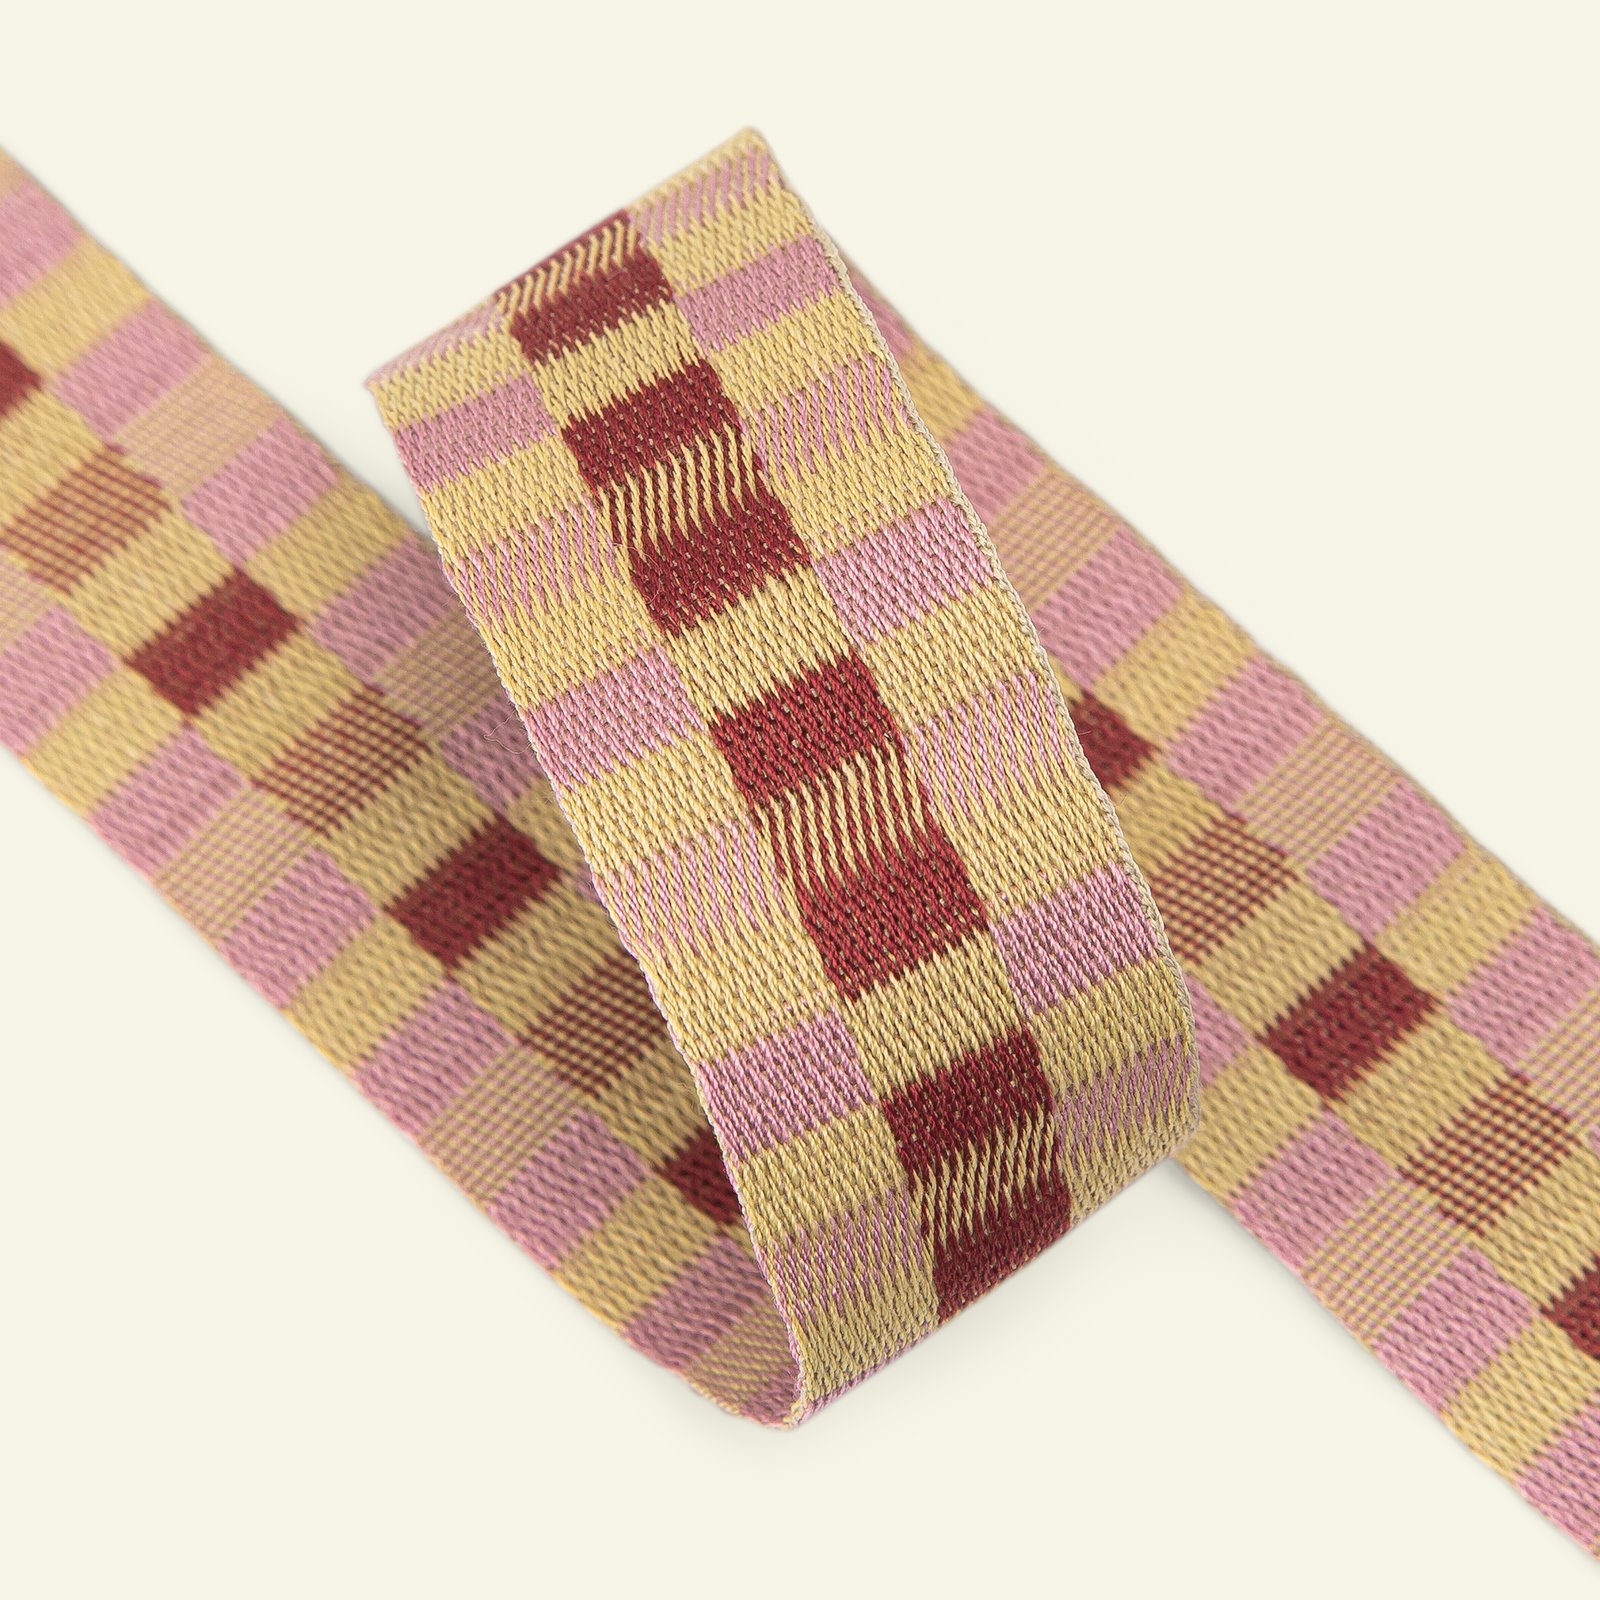 Ribbon check woven 30mm olive/red/p. 2m 22400_pack